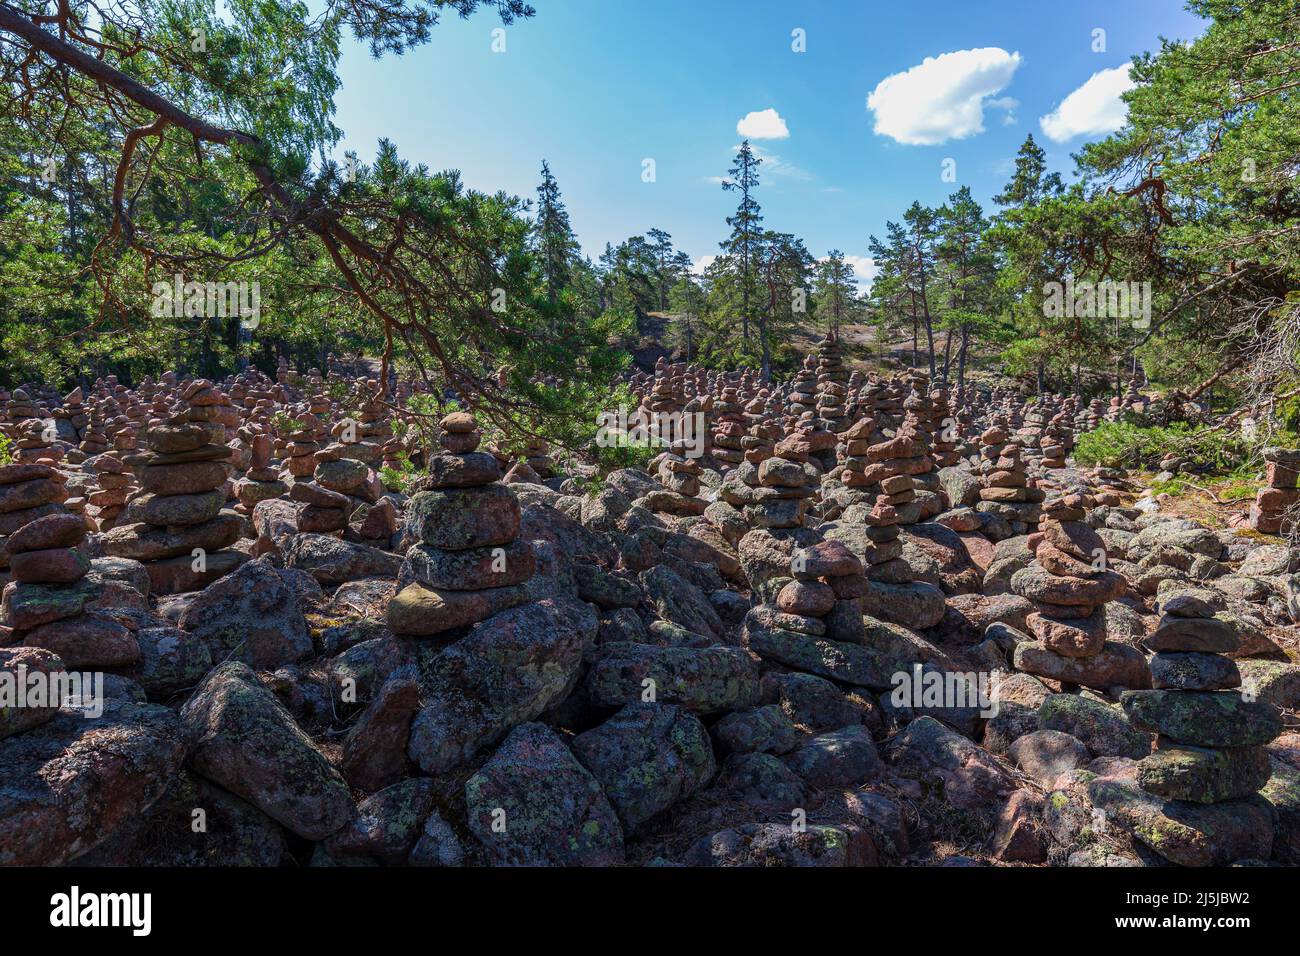 Forest full of rock formations, myriad piles of stones, along the Grottstigen cave nature trail at Geta in Åland Islands, Finland, at summer. Stock Photo